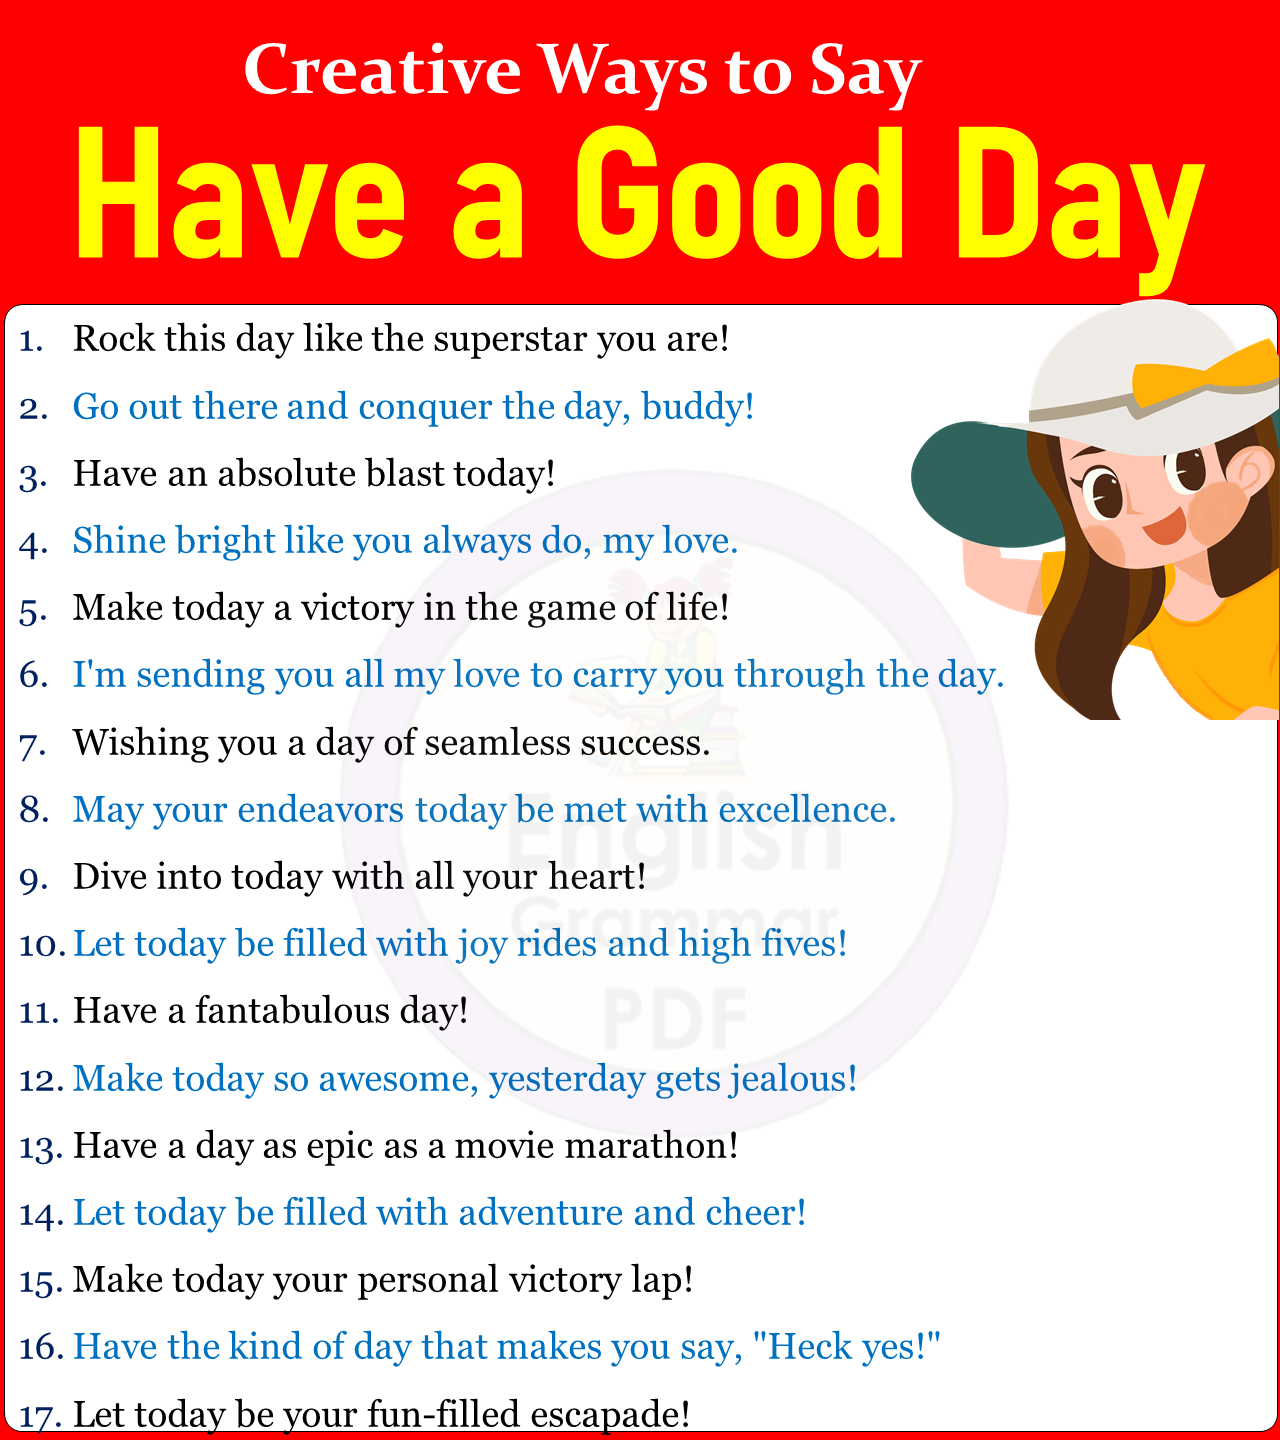 Ways to say Have a Good Day